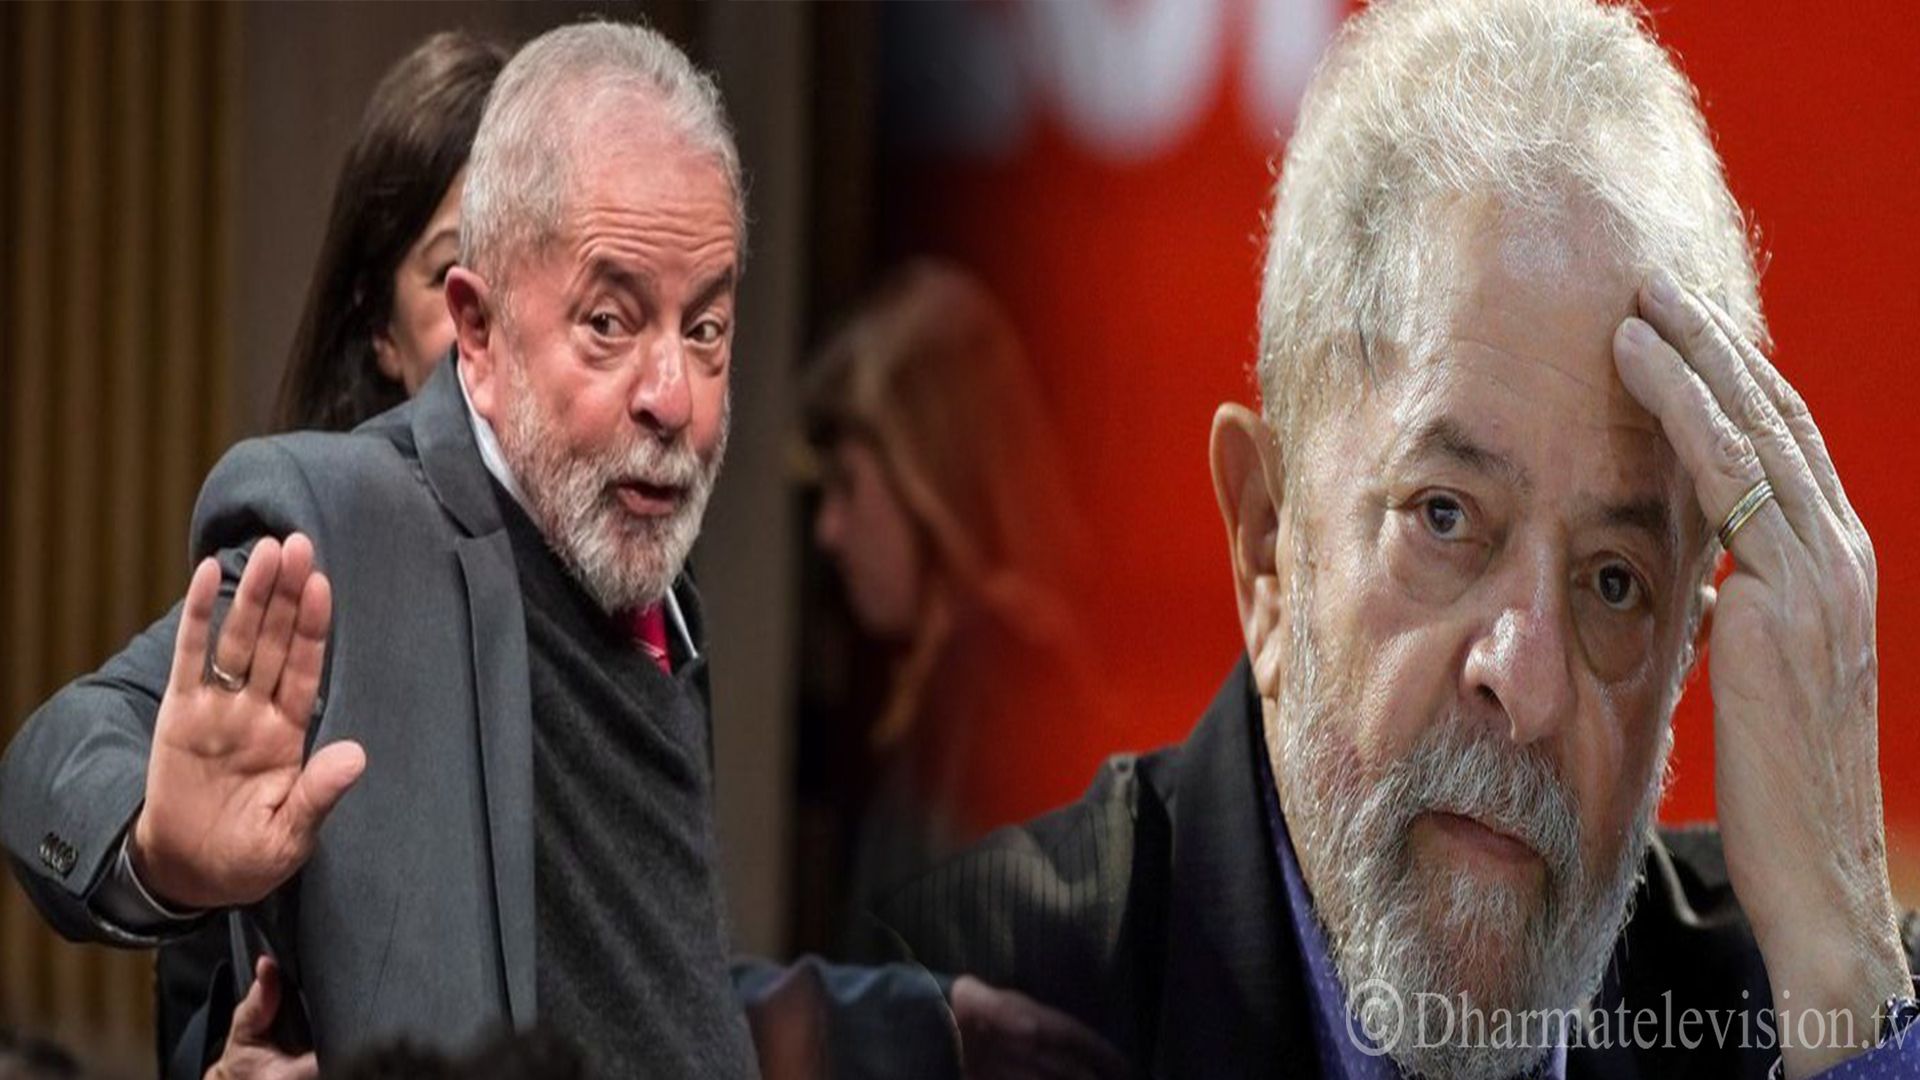 Former Brazilian President Lula acquitted of corruption charges